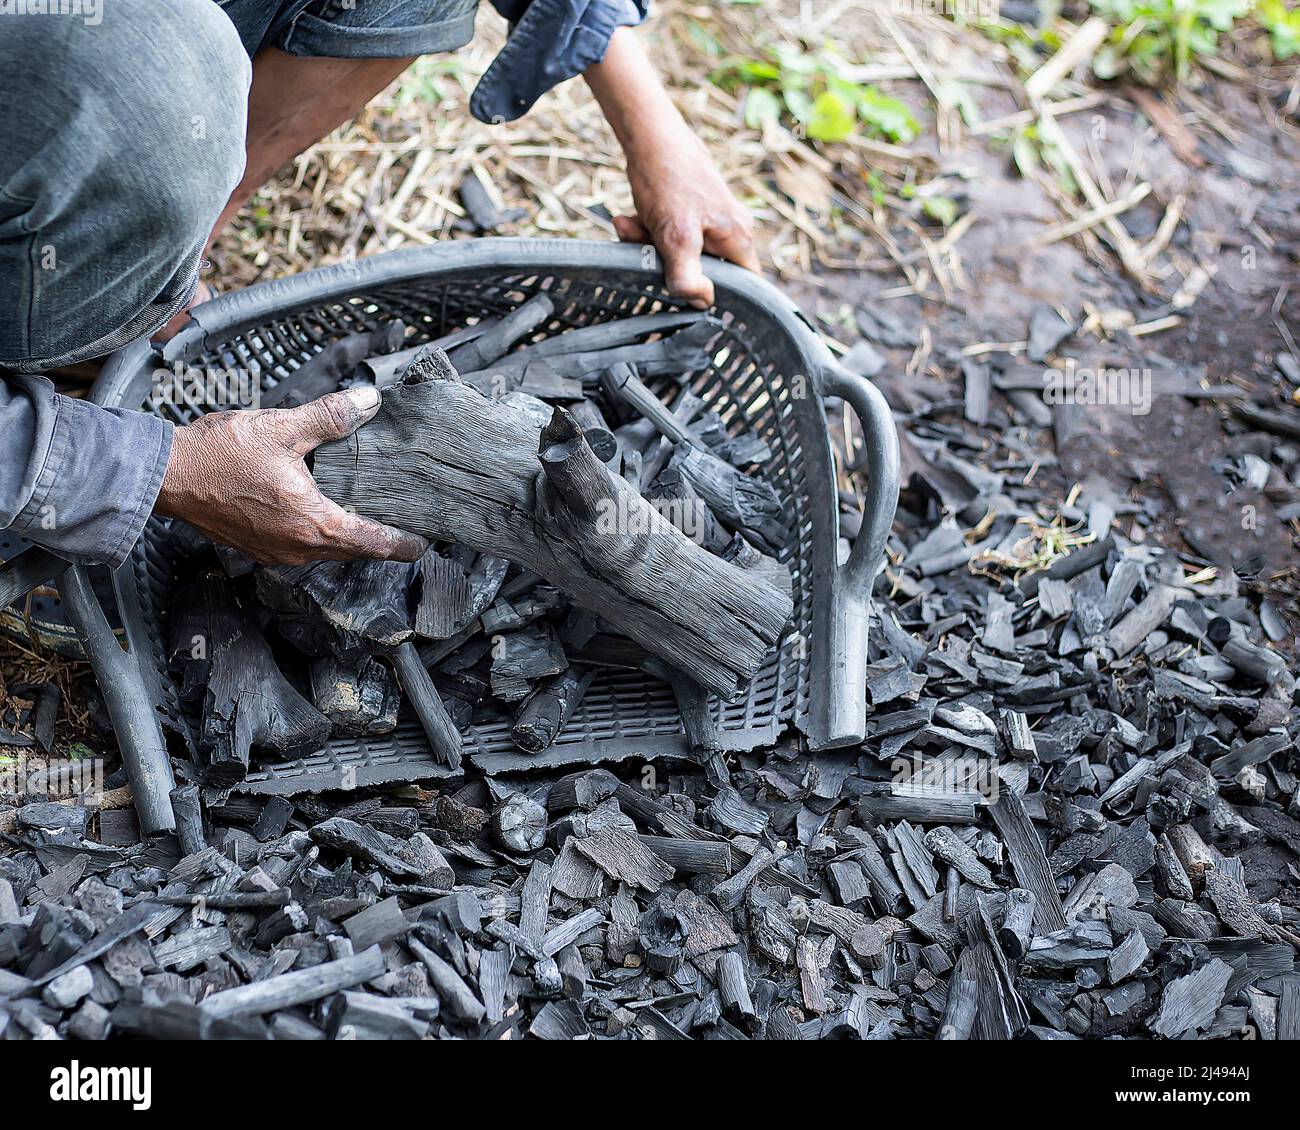 Farmers burn charcoal from wood cut off from the farm. Stock Photo